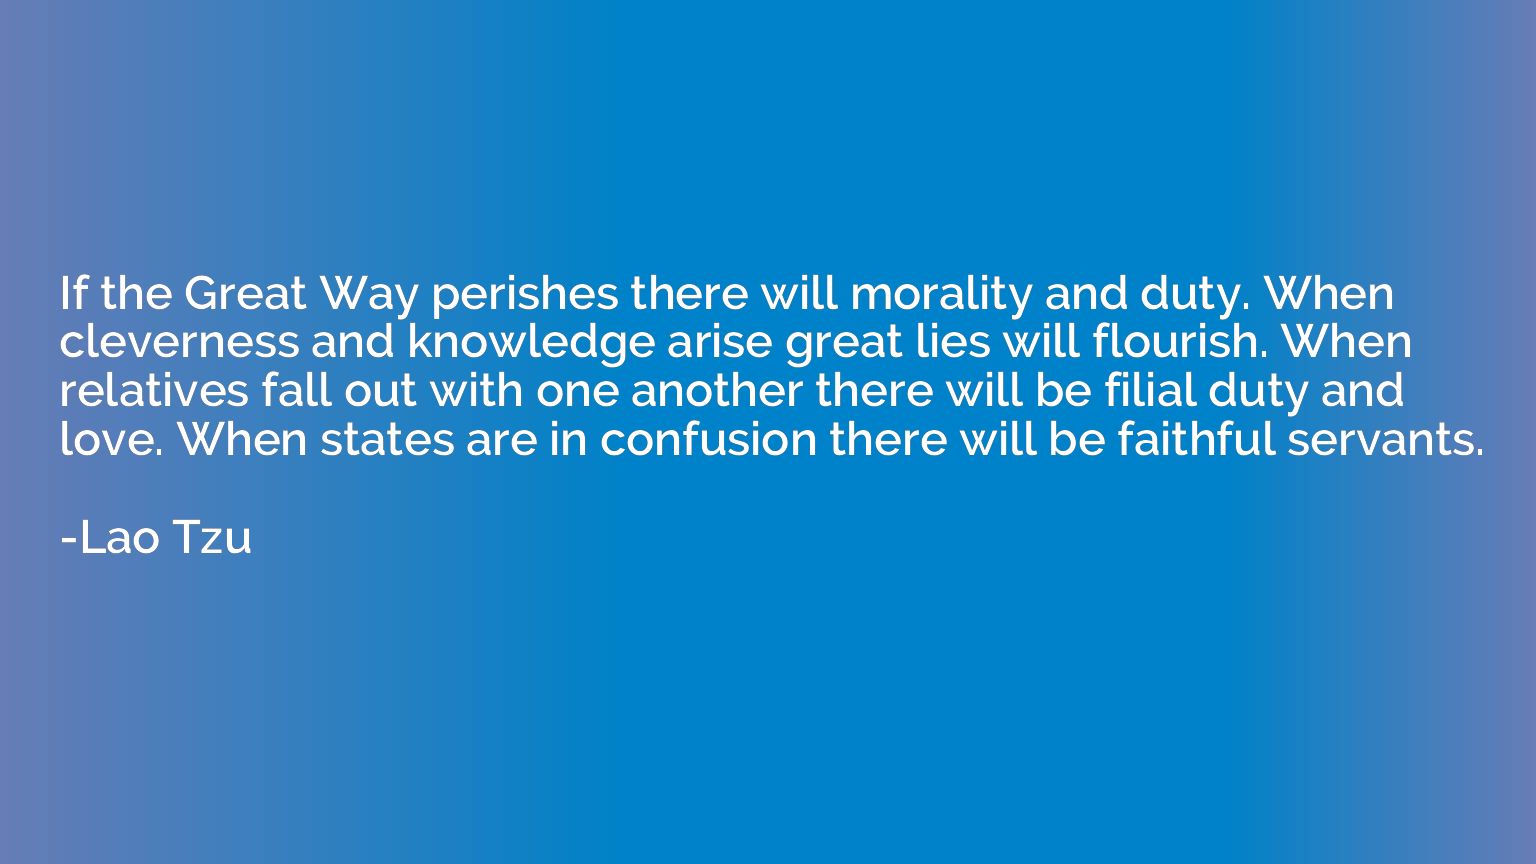 If the Great Way perishes there will morality and duty. When